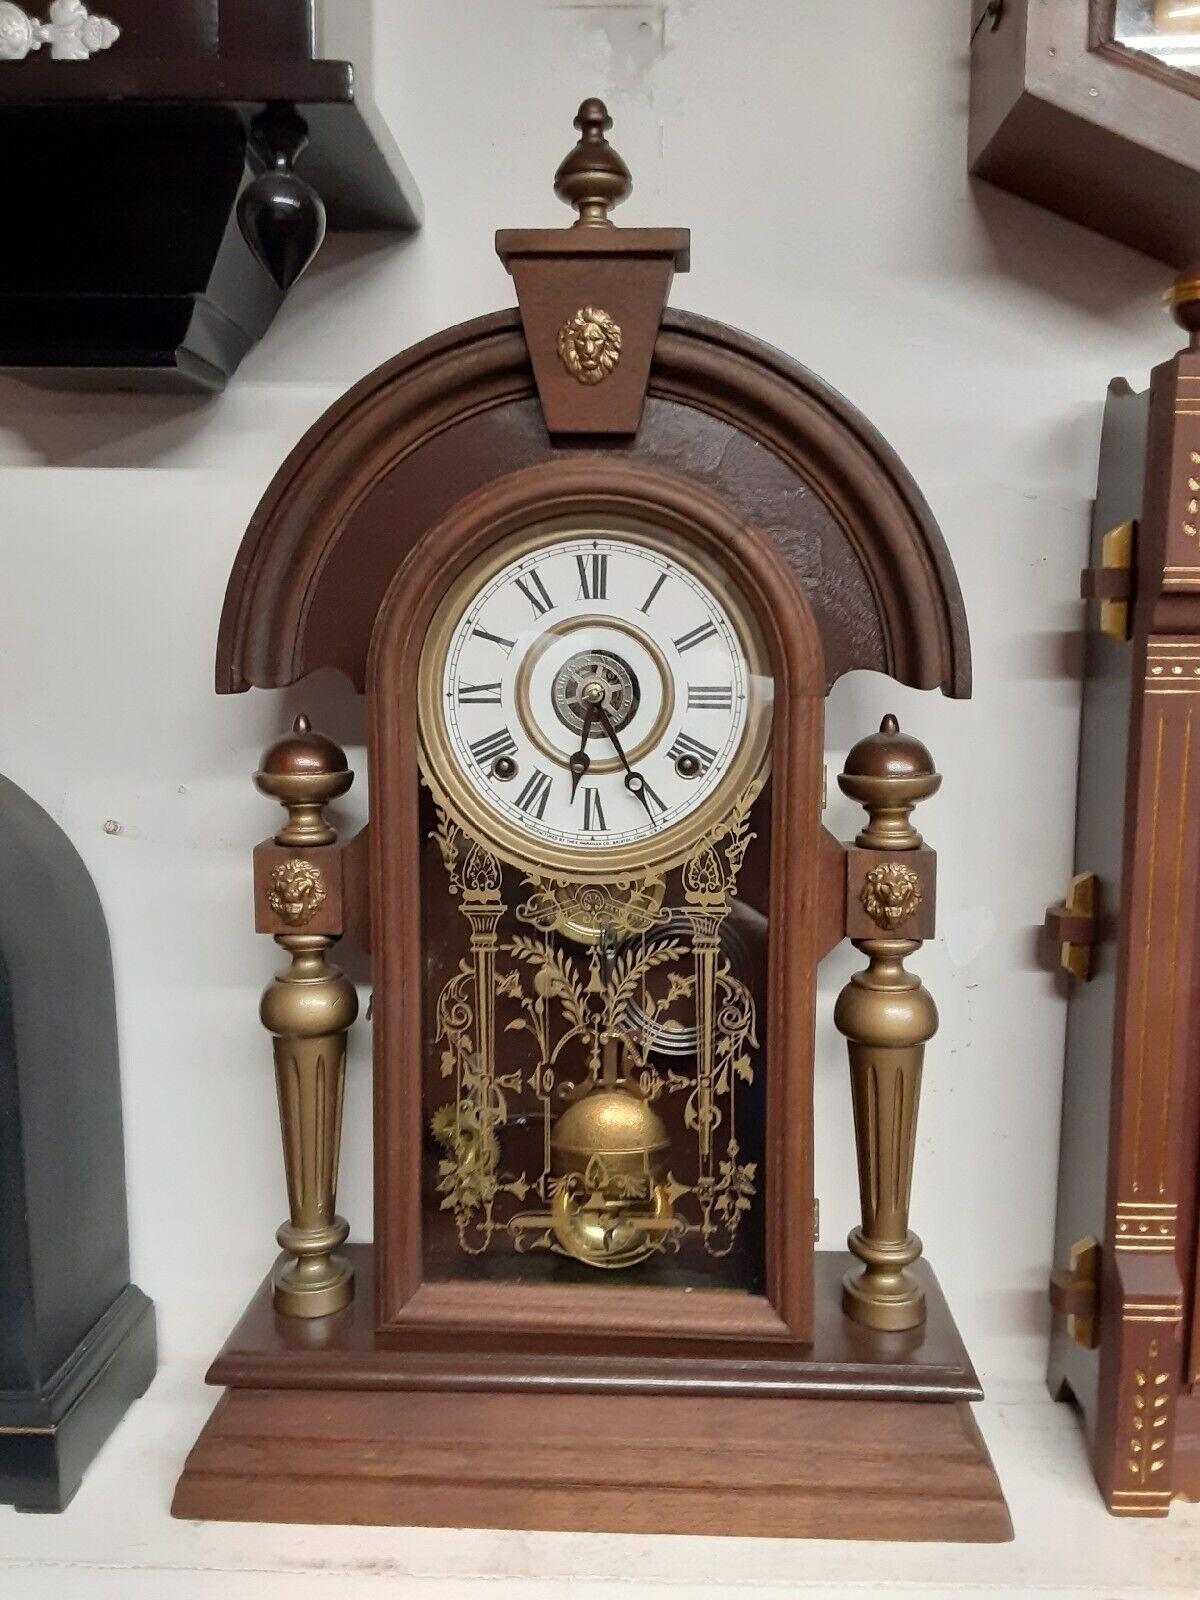 17 Antique Clocks. EACH CLOCK SOLD SEPARATELY( All offers considered)